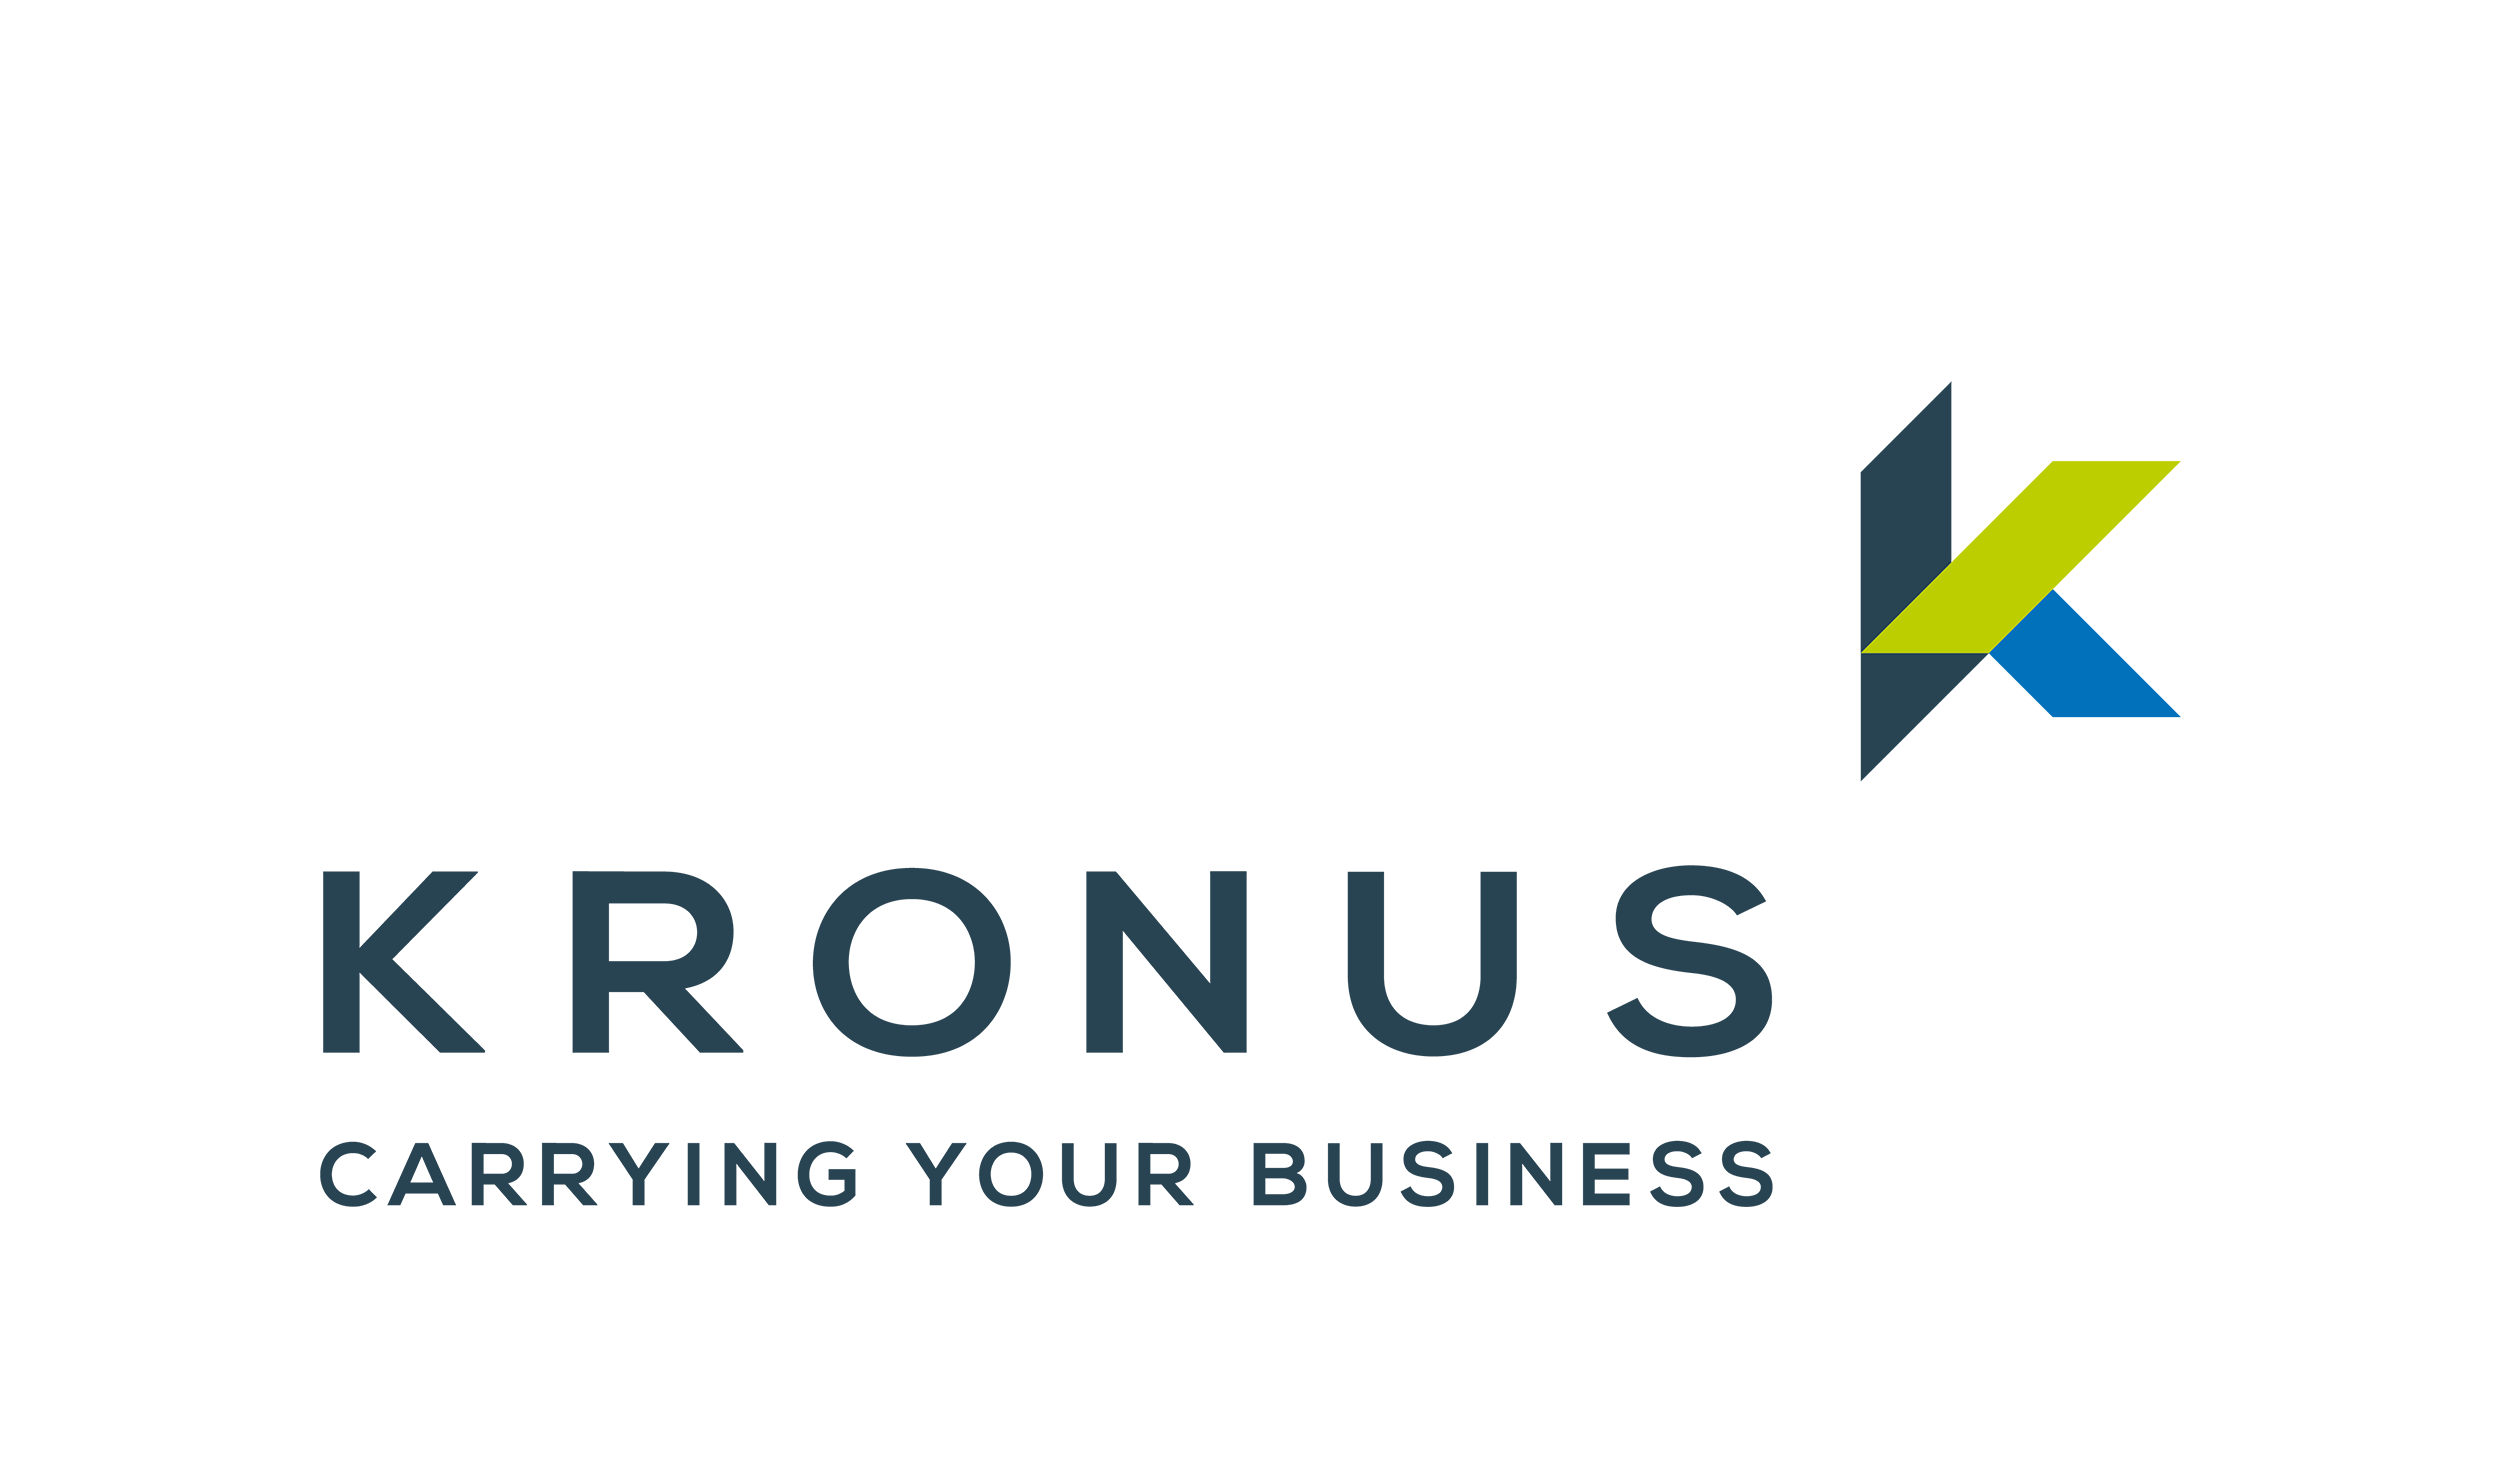 Kronus - Producer of Wooden packaging #1 in the world